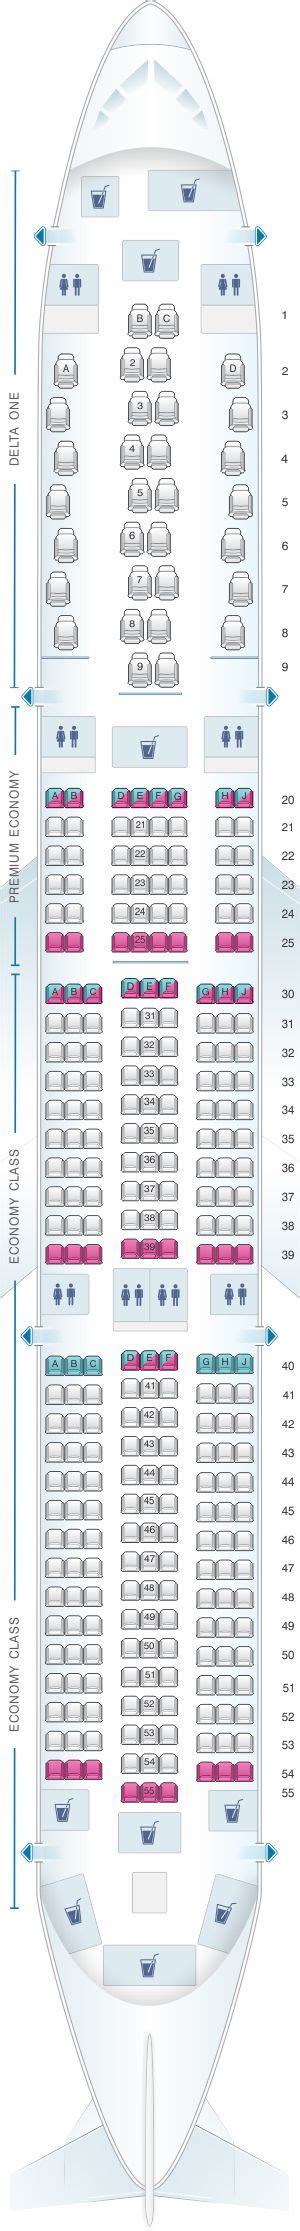 Seat Map Airbus A350 900 Air Transat China Eastern Airlines Vietnam